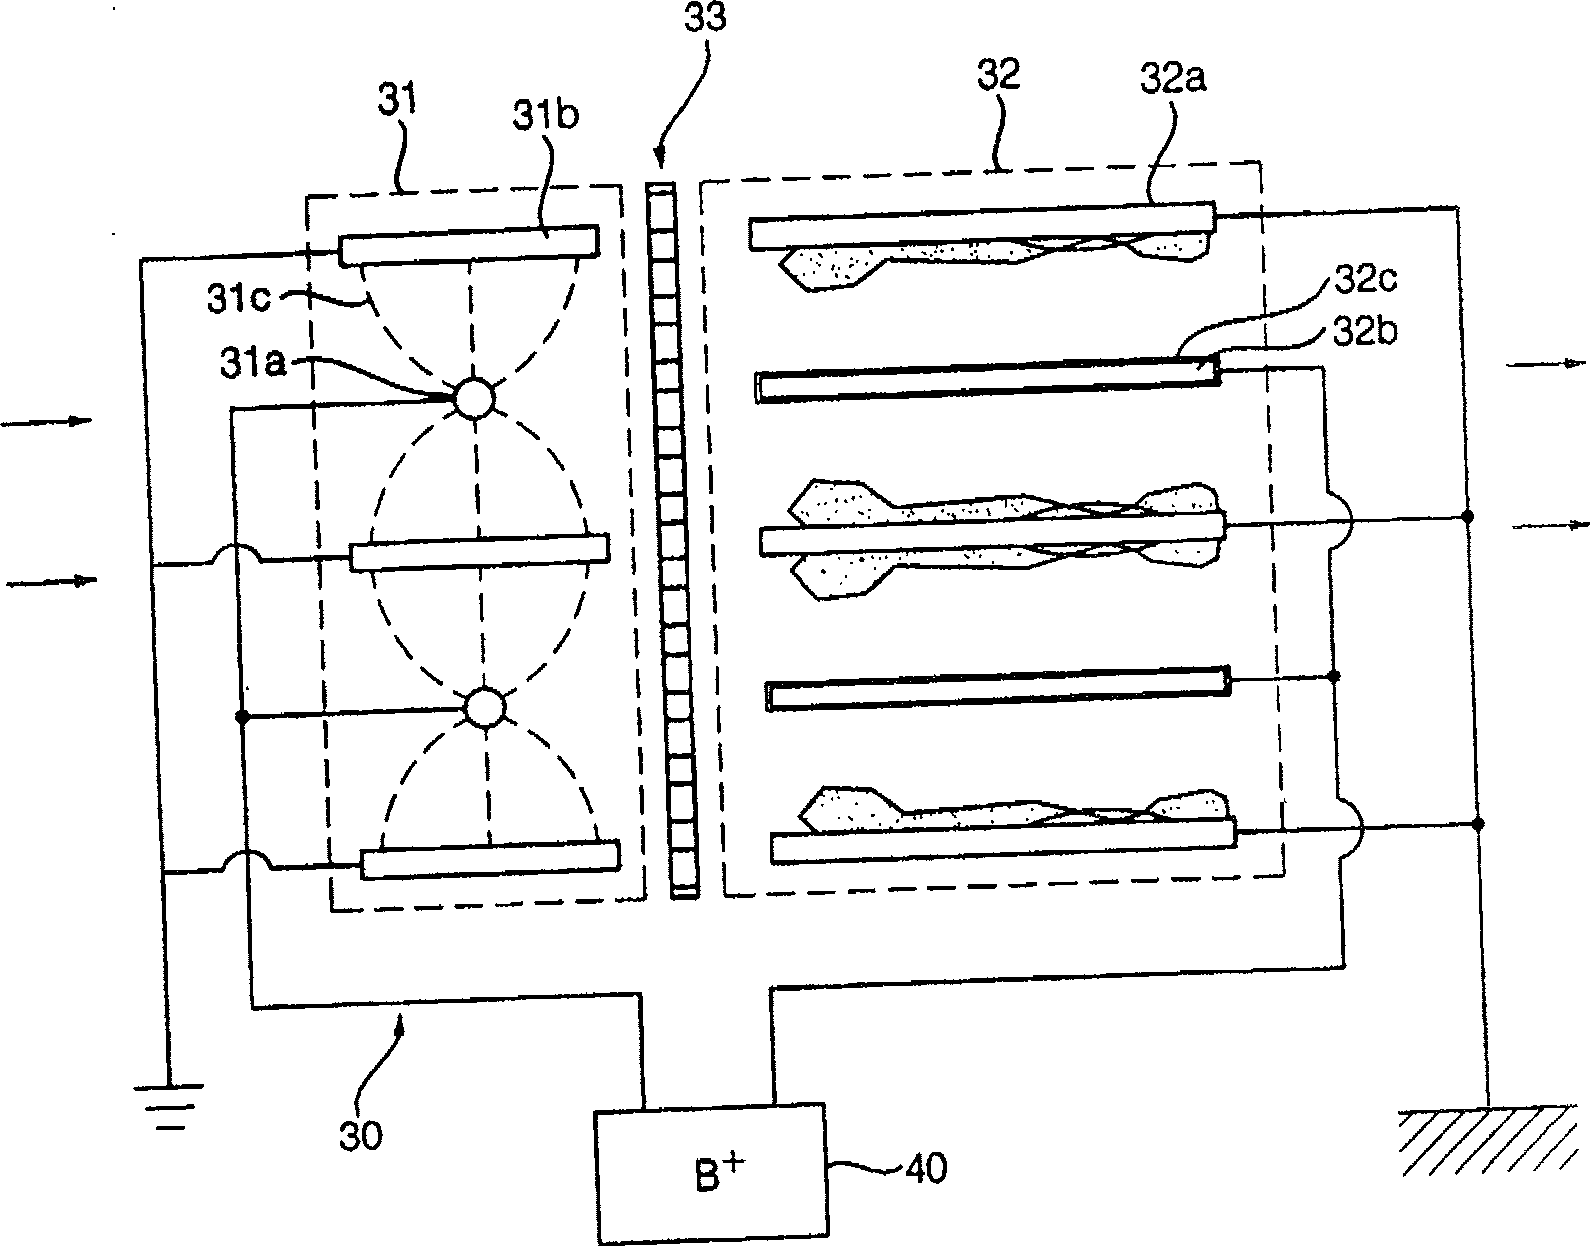 Electronic dust-collecting filter of air purifier